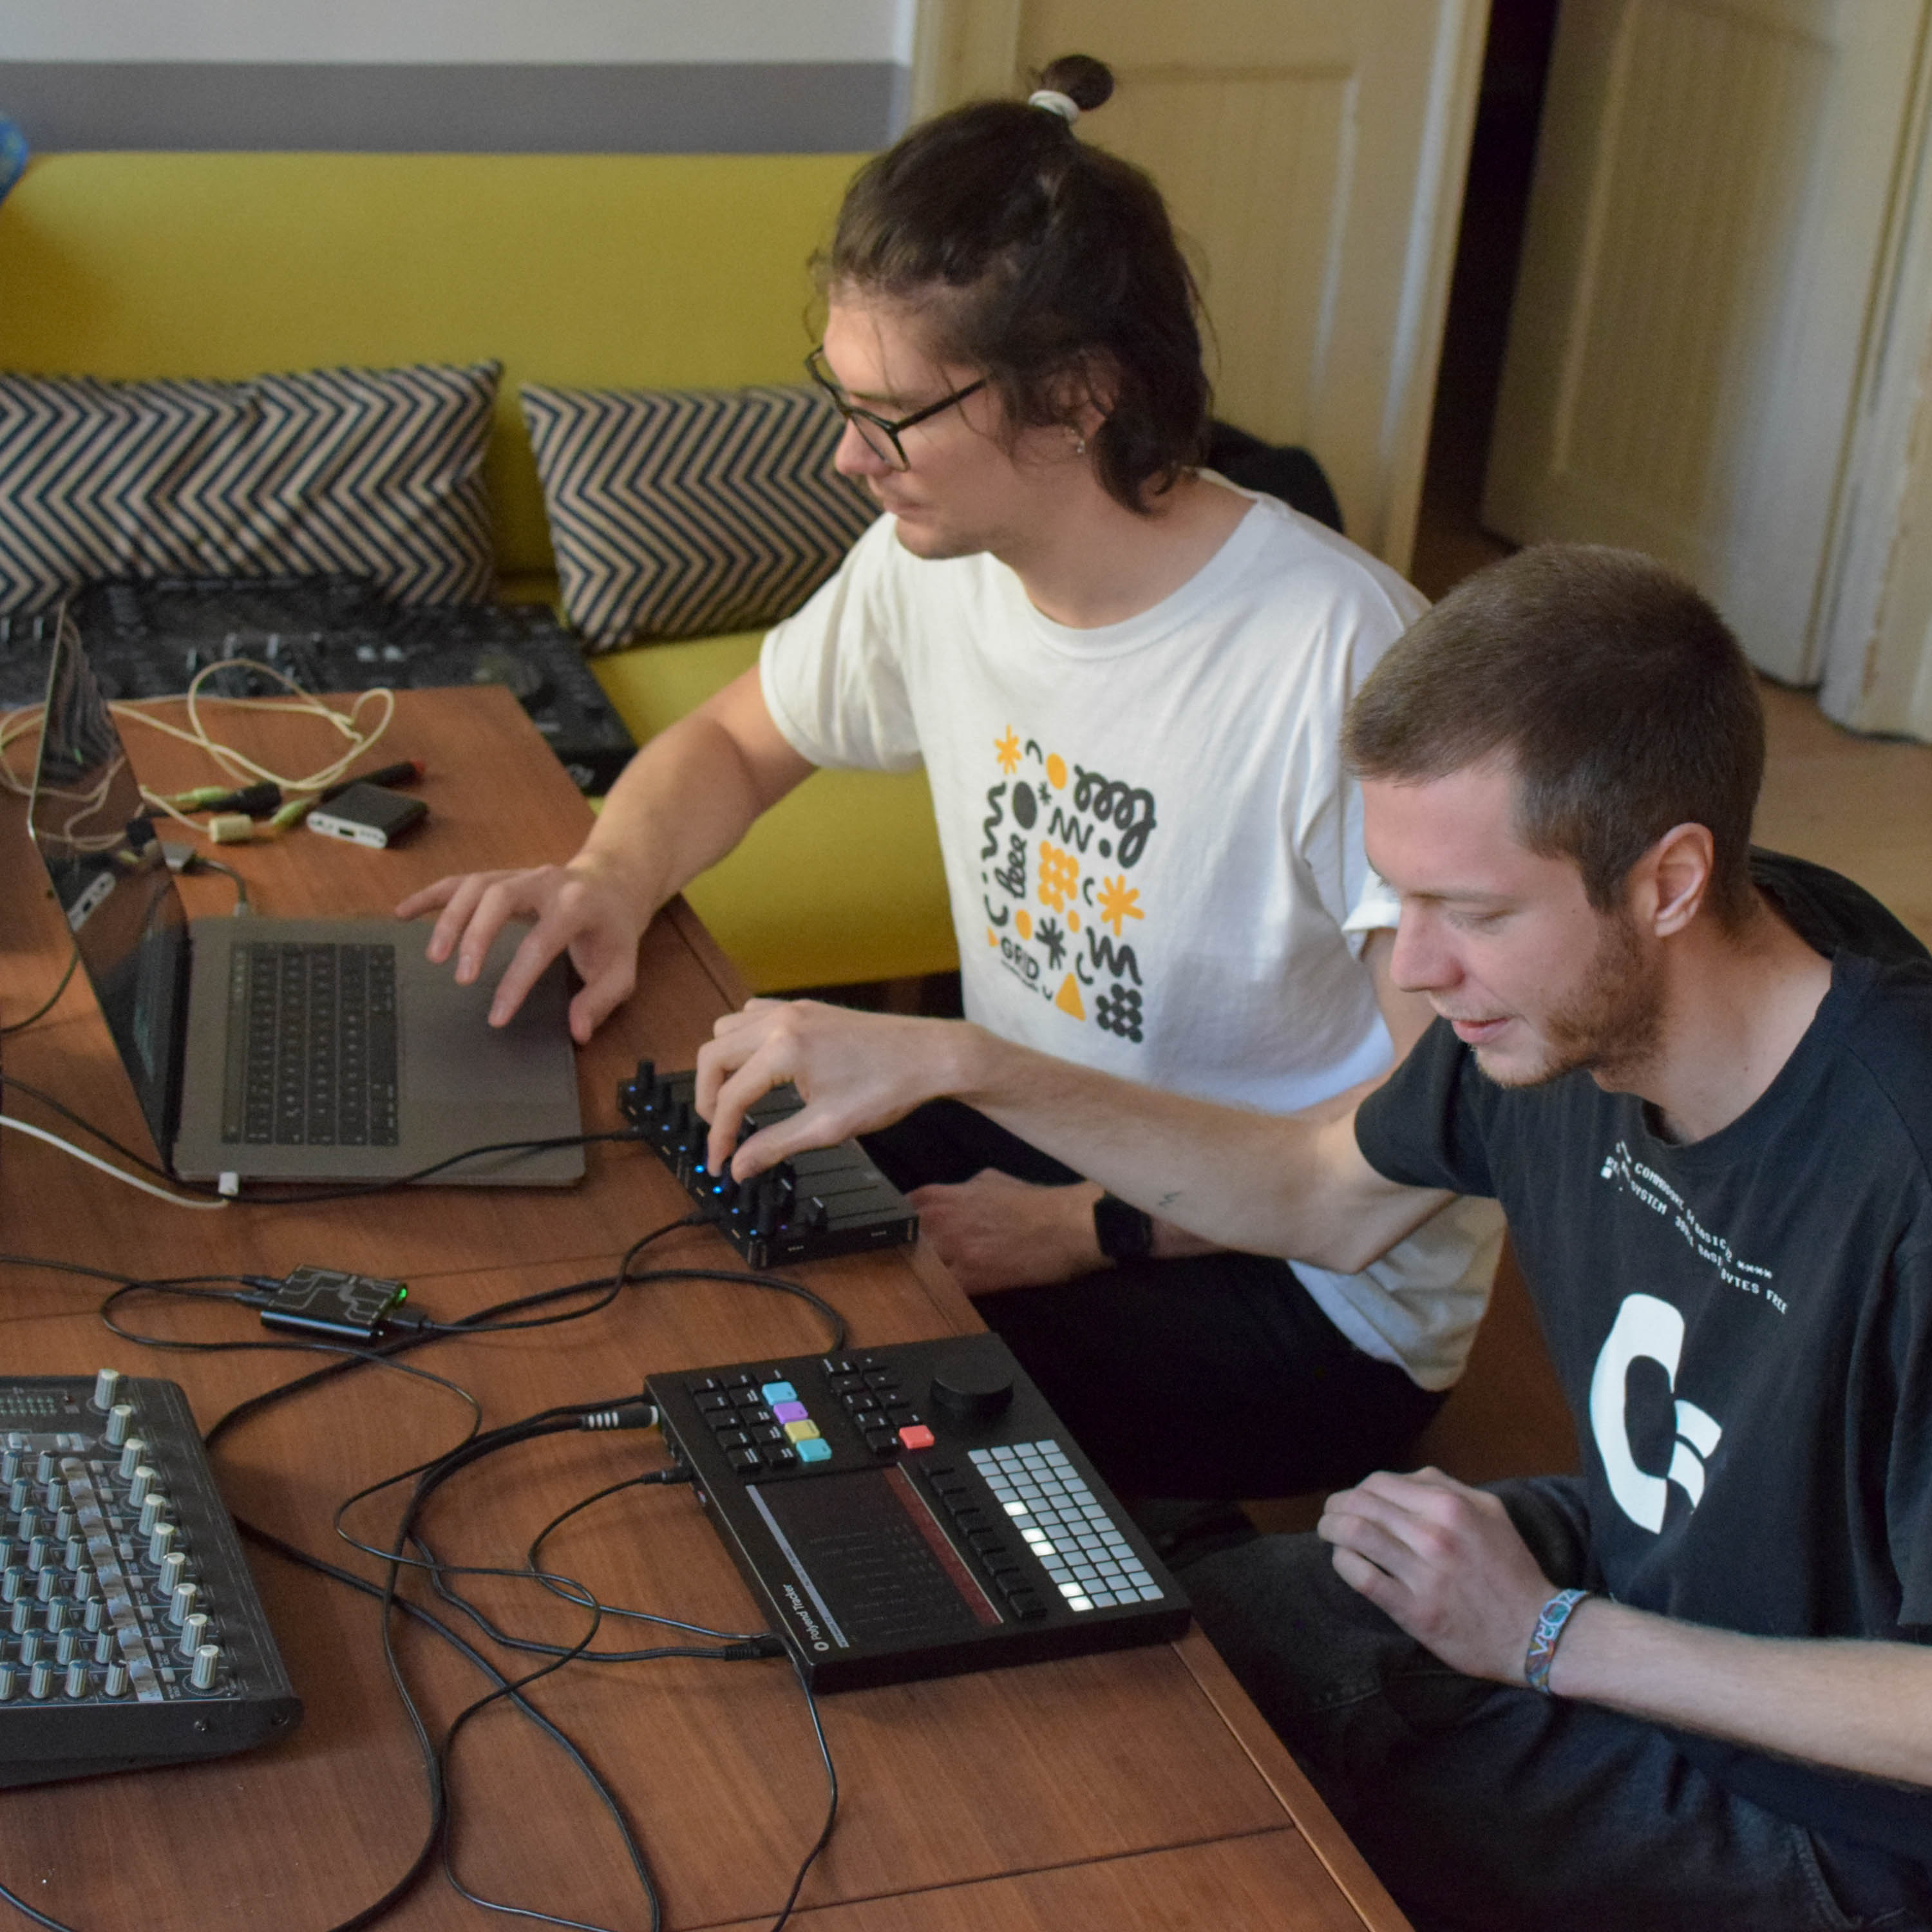 knot usb host box testing with Gergely and Tibi